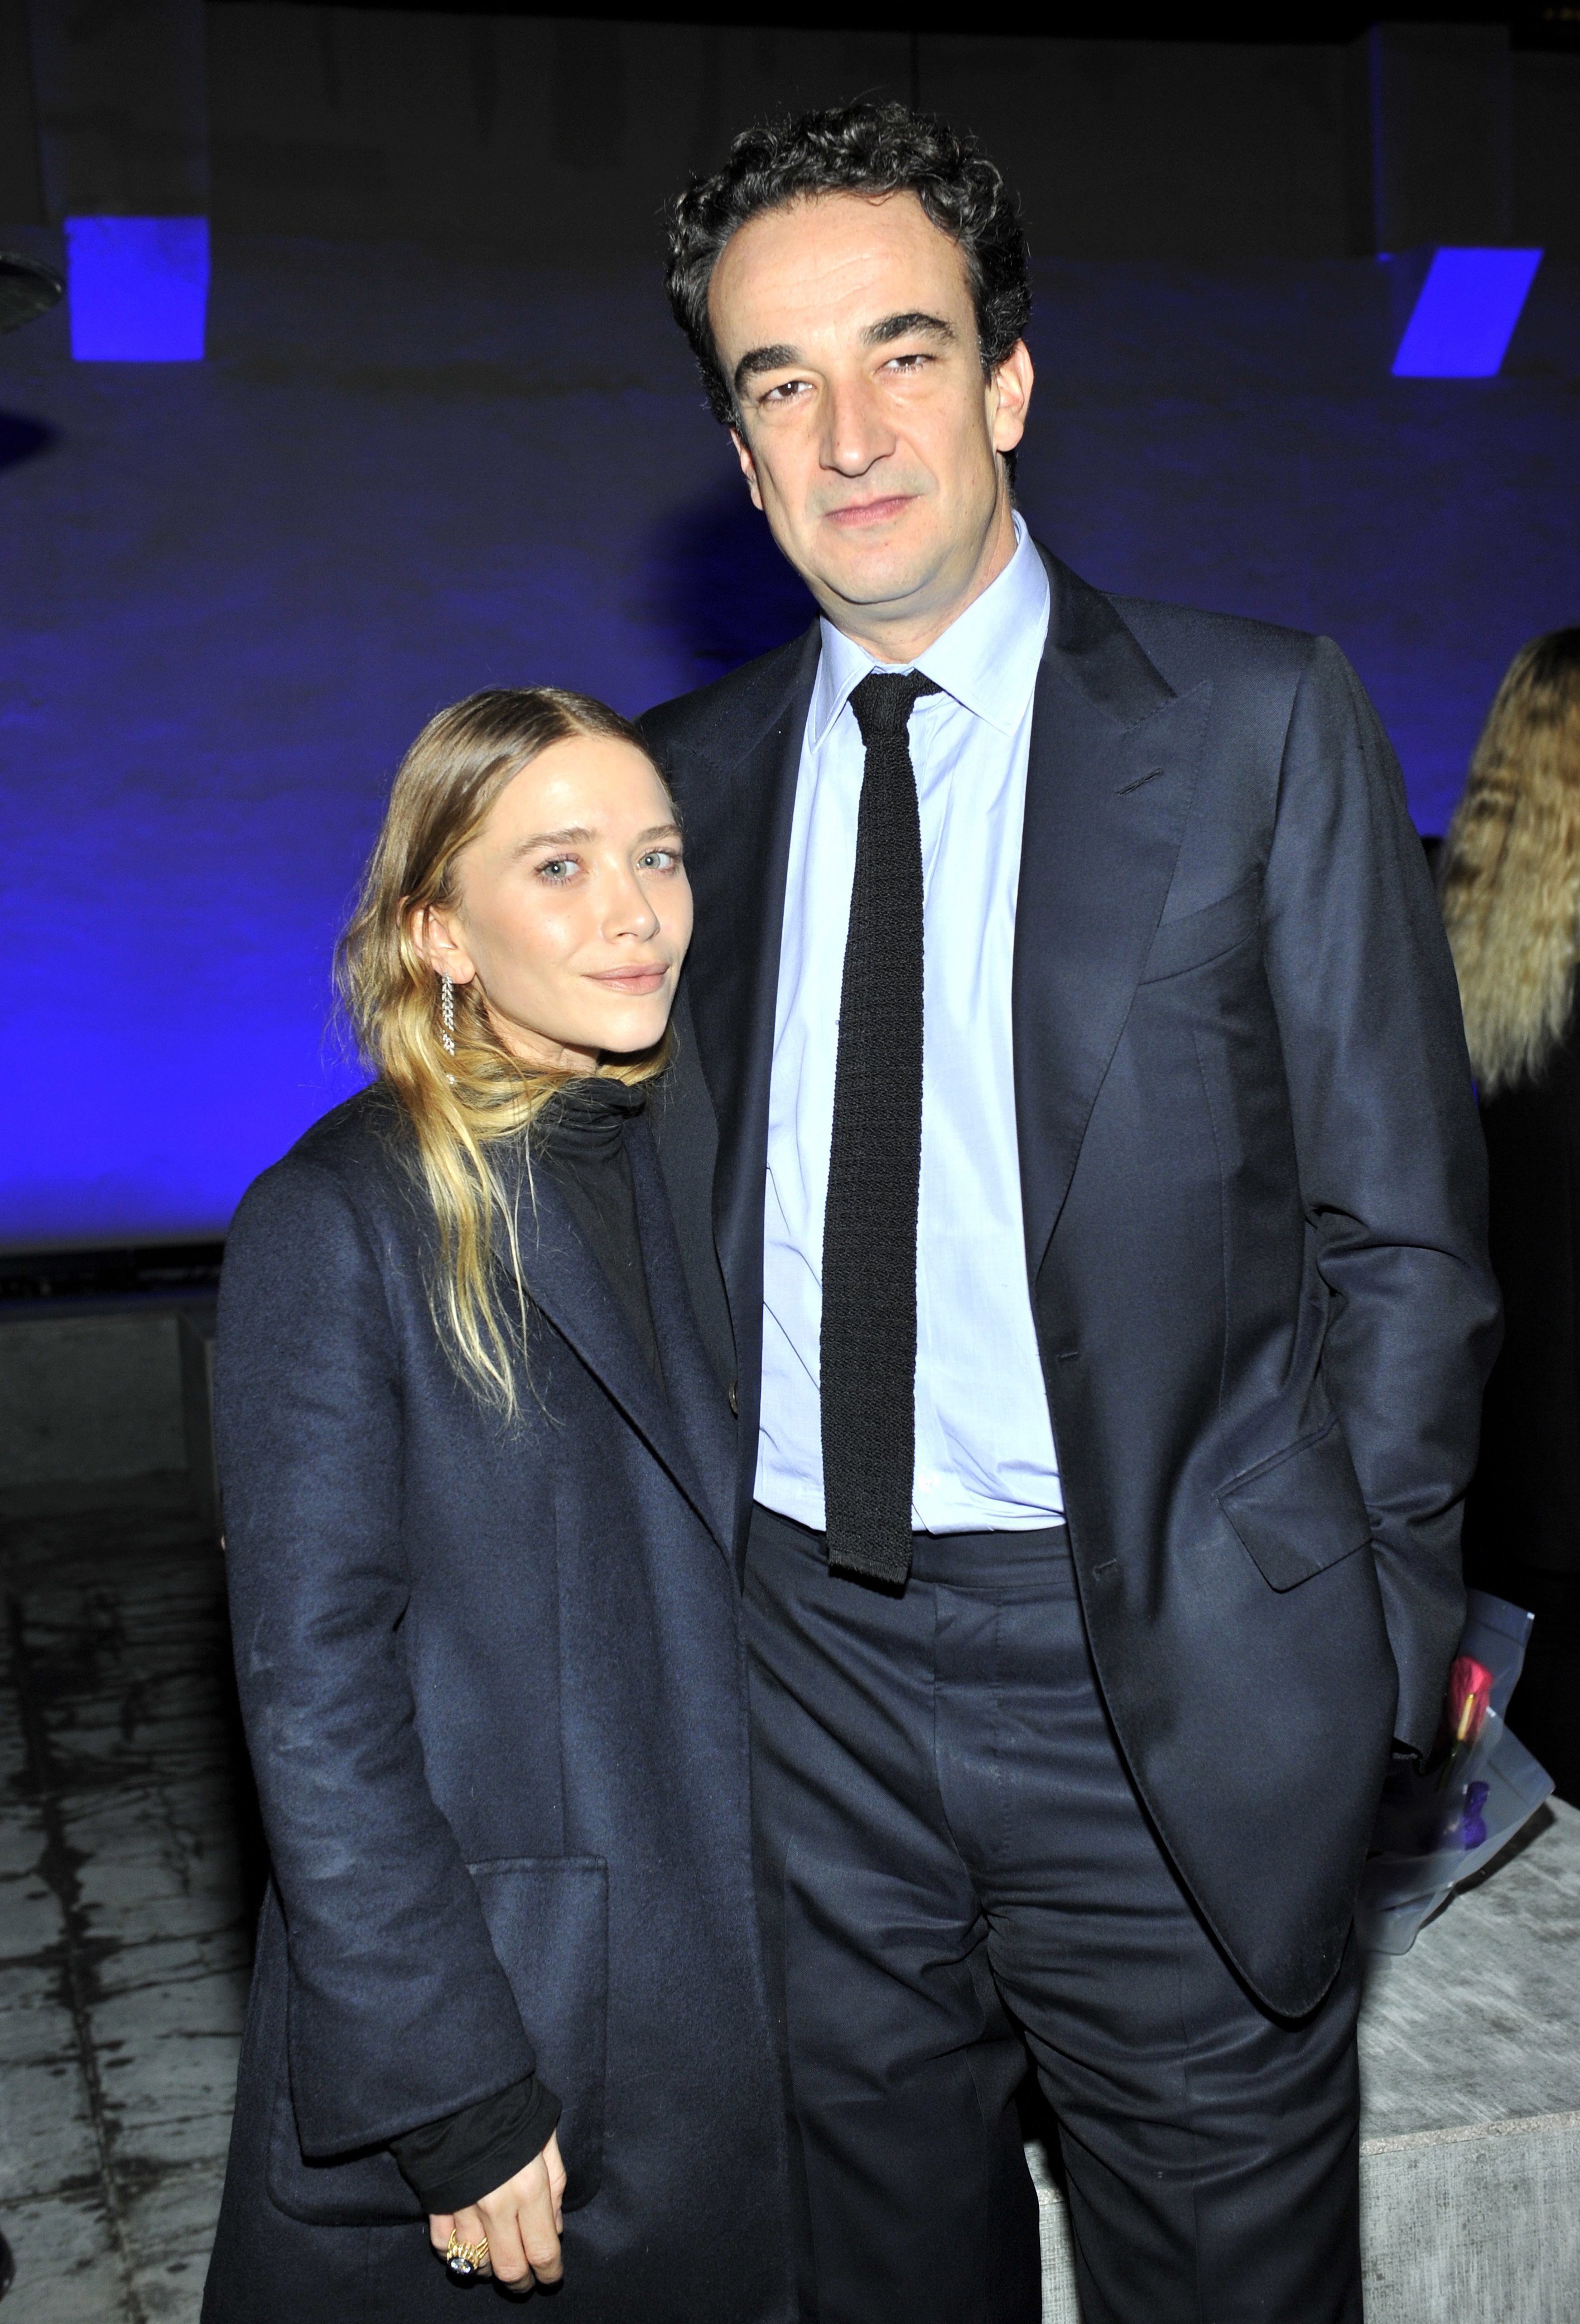 Mary-Kate Olsen and Olivier Sarkozy on December 5, 2014 in Los Angeles, California | Photo: Getty Images